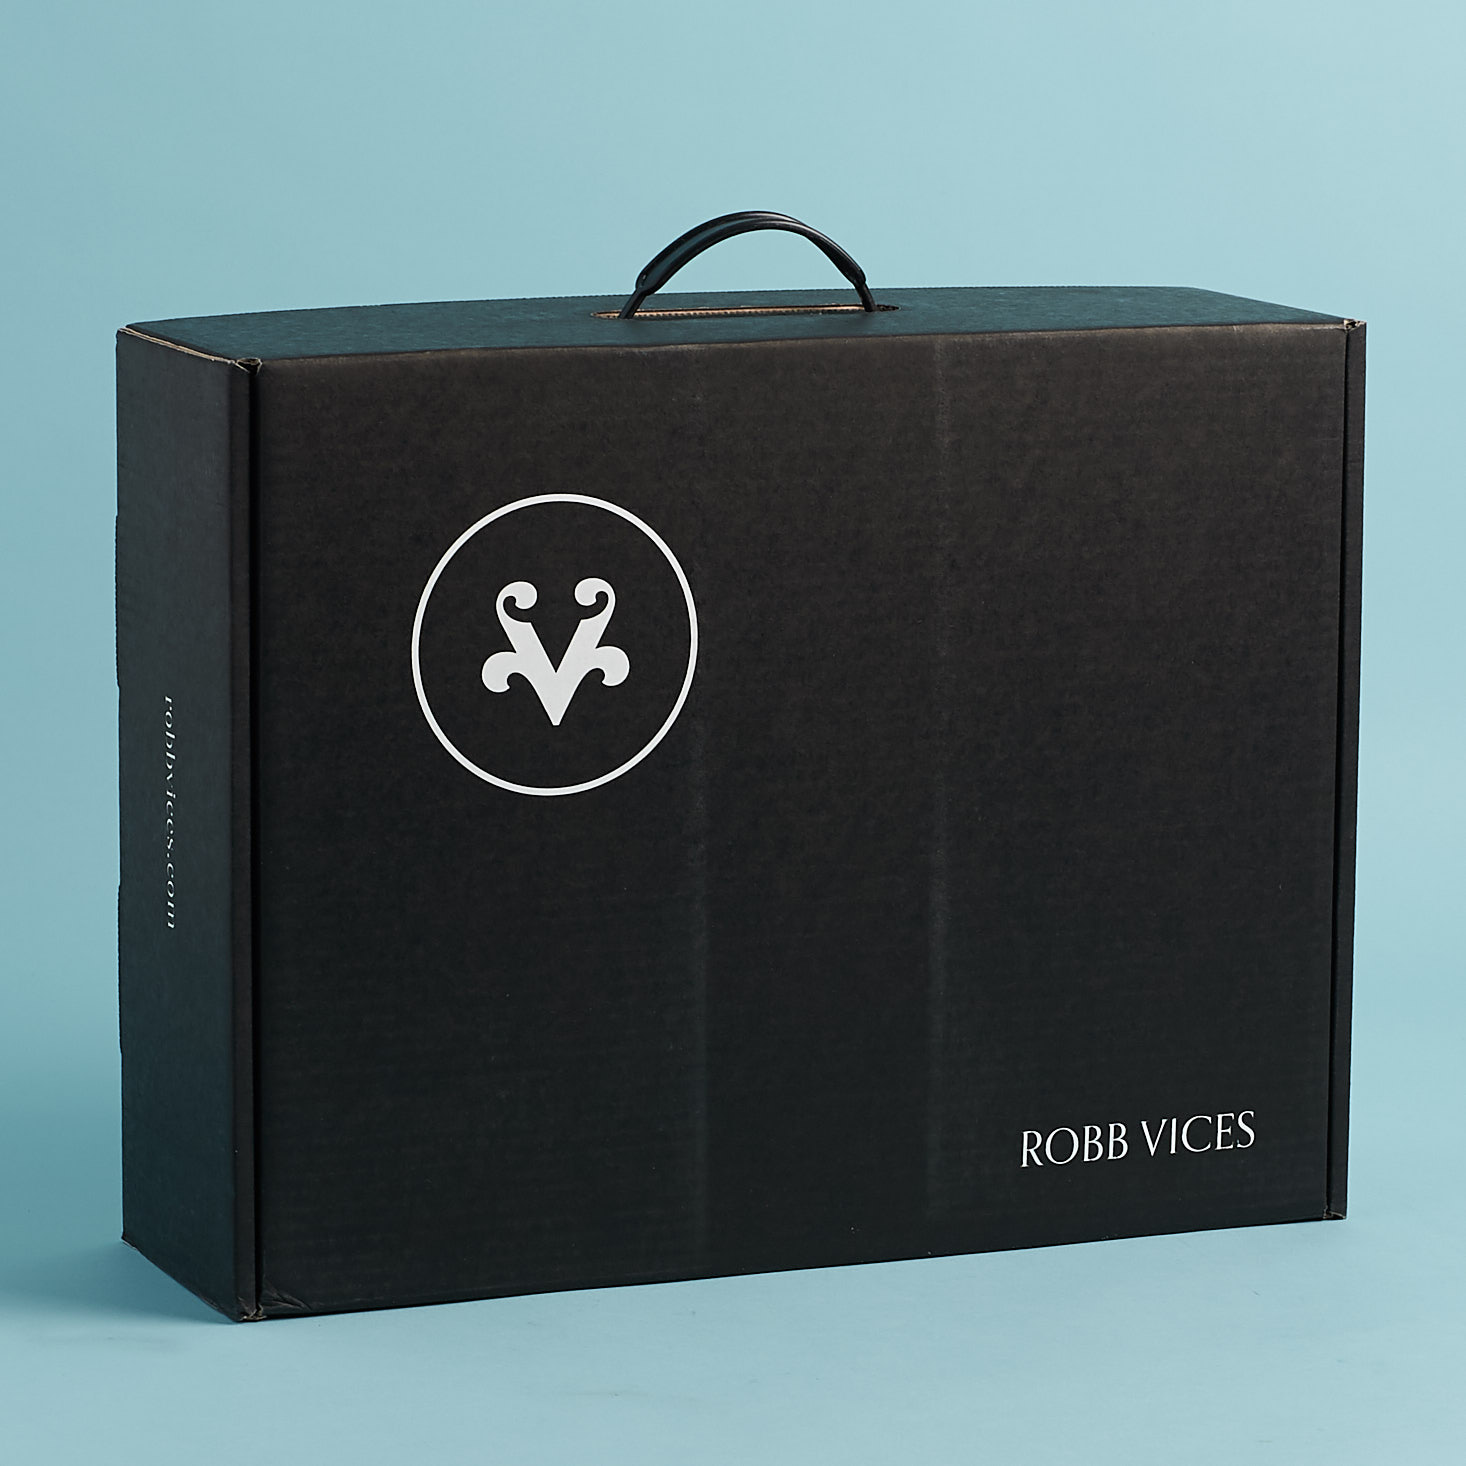 Robb Vices “Ultimate Survival Kit” Subscription Box Review – June 2018